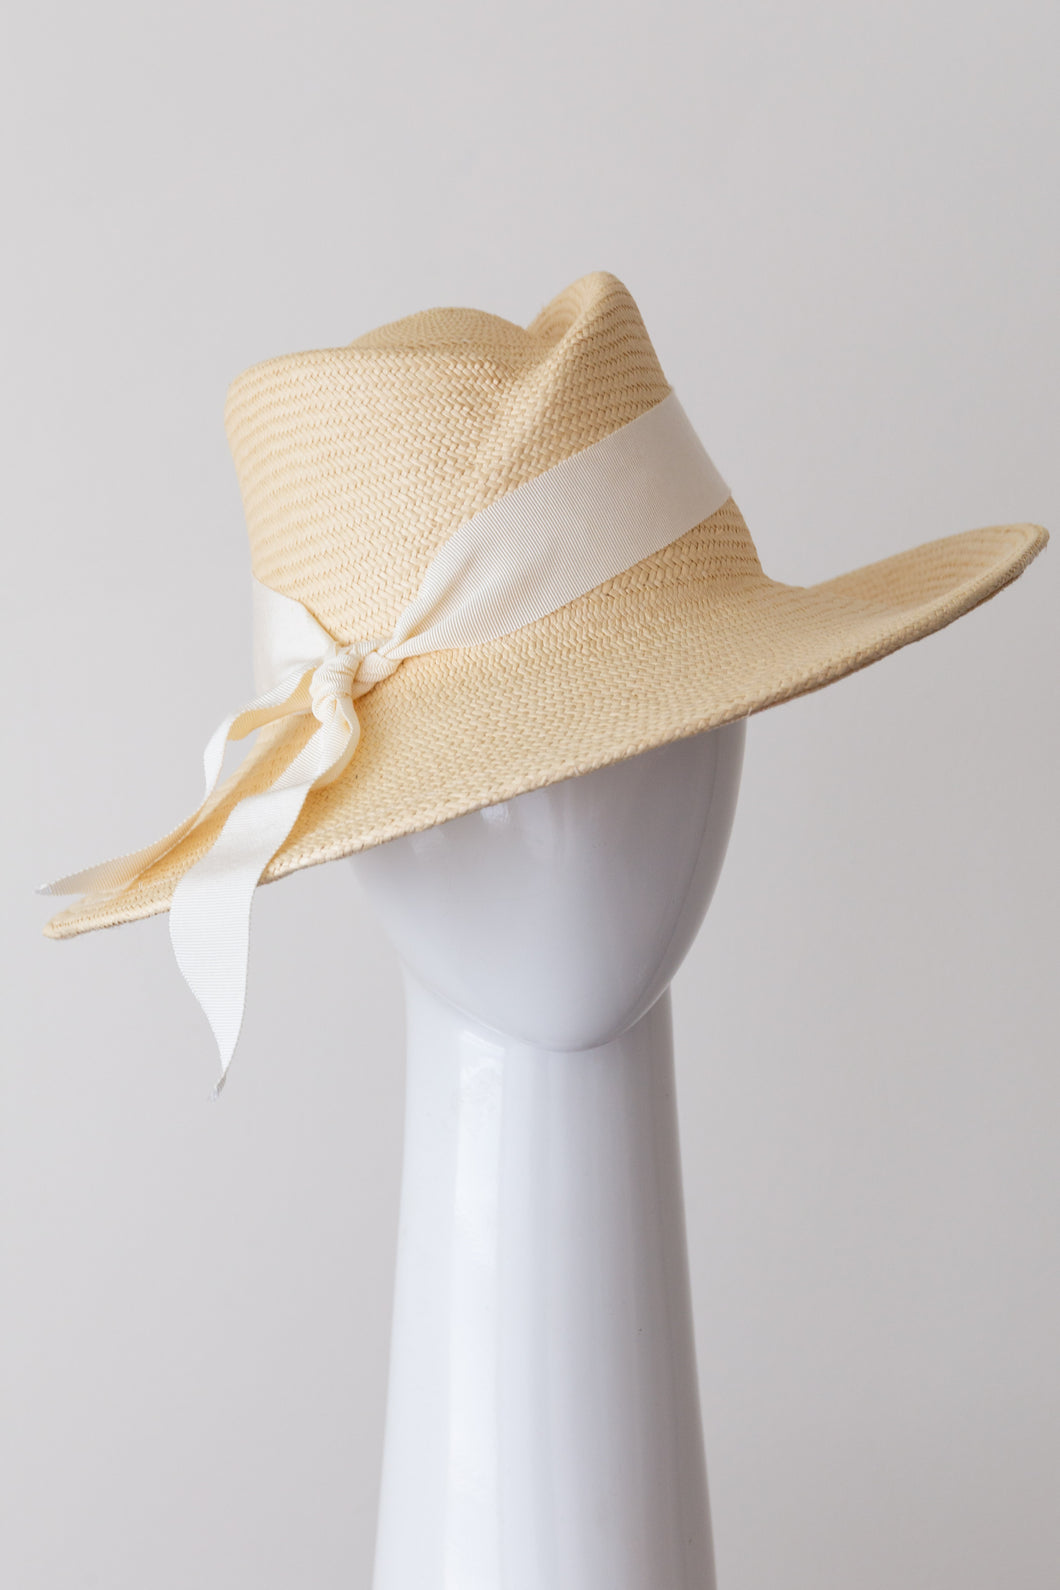 Panama Sun Hat in Natural Straw by Felicity Northeast Millinery